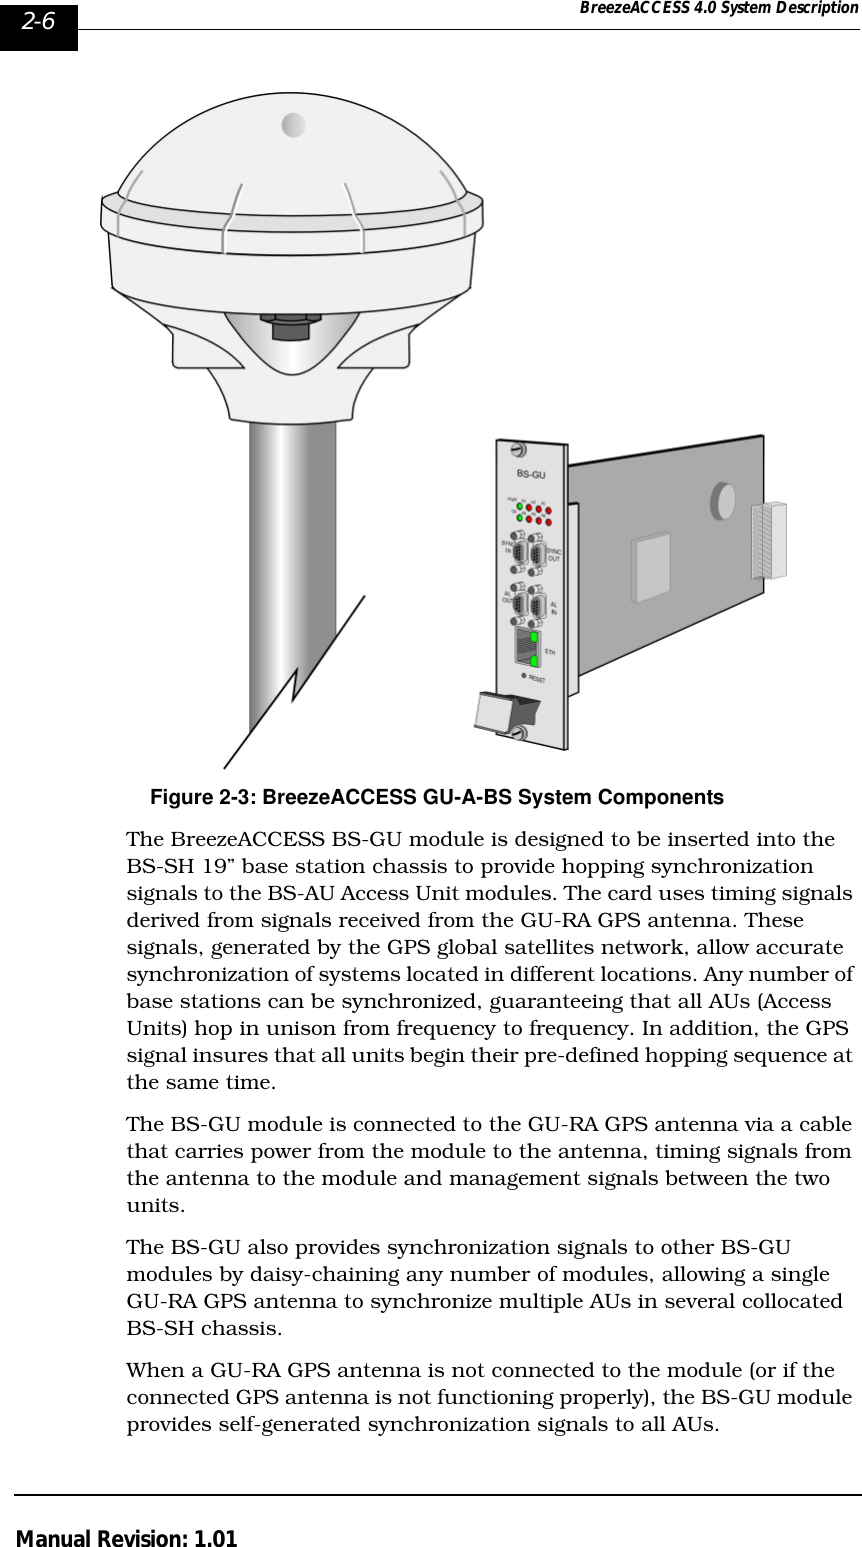 2-6 BreezeACCESS 4.0 System DescriptionManual Revision: 1.01Figure 2-3: BreezeACCESS GU-A-BS System ComponentsThe BreezeACCESS BS-GU module is designed to be inserted into the BS-SH 19” base station chassis to provide hopping synchronization signals to the BS-AU Access Unit modules. The card uses timing signals derived from signals received from the GU-RA GPS antenna. These signals, generated by the GPS global satellites network, allow accurate synchronization of systems located in different locations. Any number of base stations can be synchronized, guaranteeing that all AUs (Access Units) hop in unison from frequency to frequency. In addition, the GPS signal insures that all units begin their pre-defined hopping sequence at the same time. The BS-GU module is connected to the GU-RA GPS antenna via a cable that carries power from the module to the antenna, timing signals from the antenna to the module and management signals between the two units.The BS-GU also provides synchronization signals to other BS-GU modules by daisy-chaining any number of modules, allowing a single GU-RA GPS antenna to synchronize multiple AUs in several collocated BS-SH chassis.When a GU-RA GPS antenna is not connected to the module (or if the connected GPS antenna is not functioning properly), the BS-GU module provides self-generated synchronization signals to all AUs. 